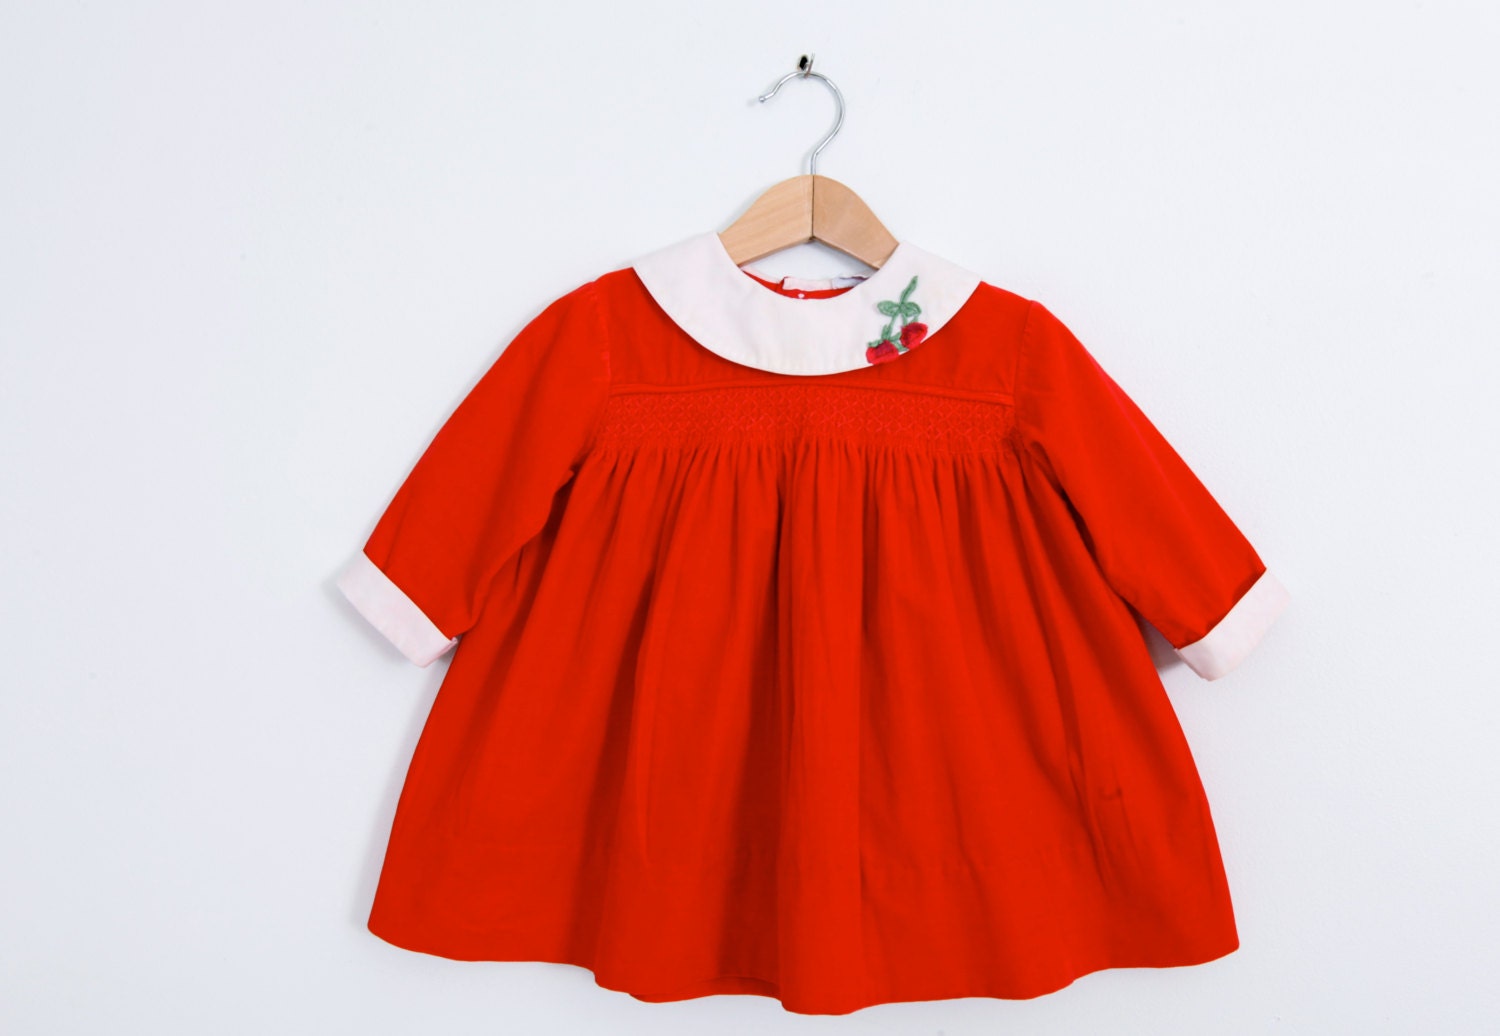 Vintage Baby Dress in Smocked Red Velvet with Cherries by udaskids